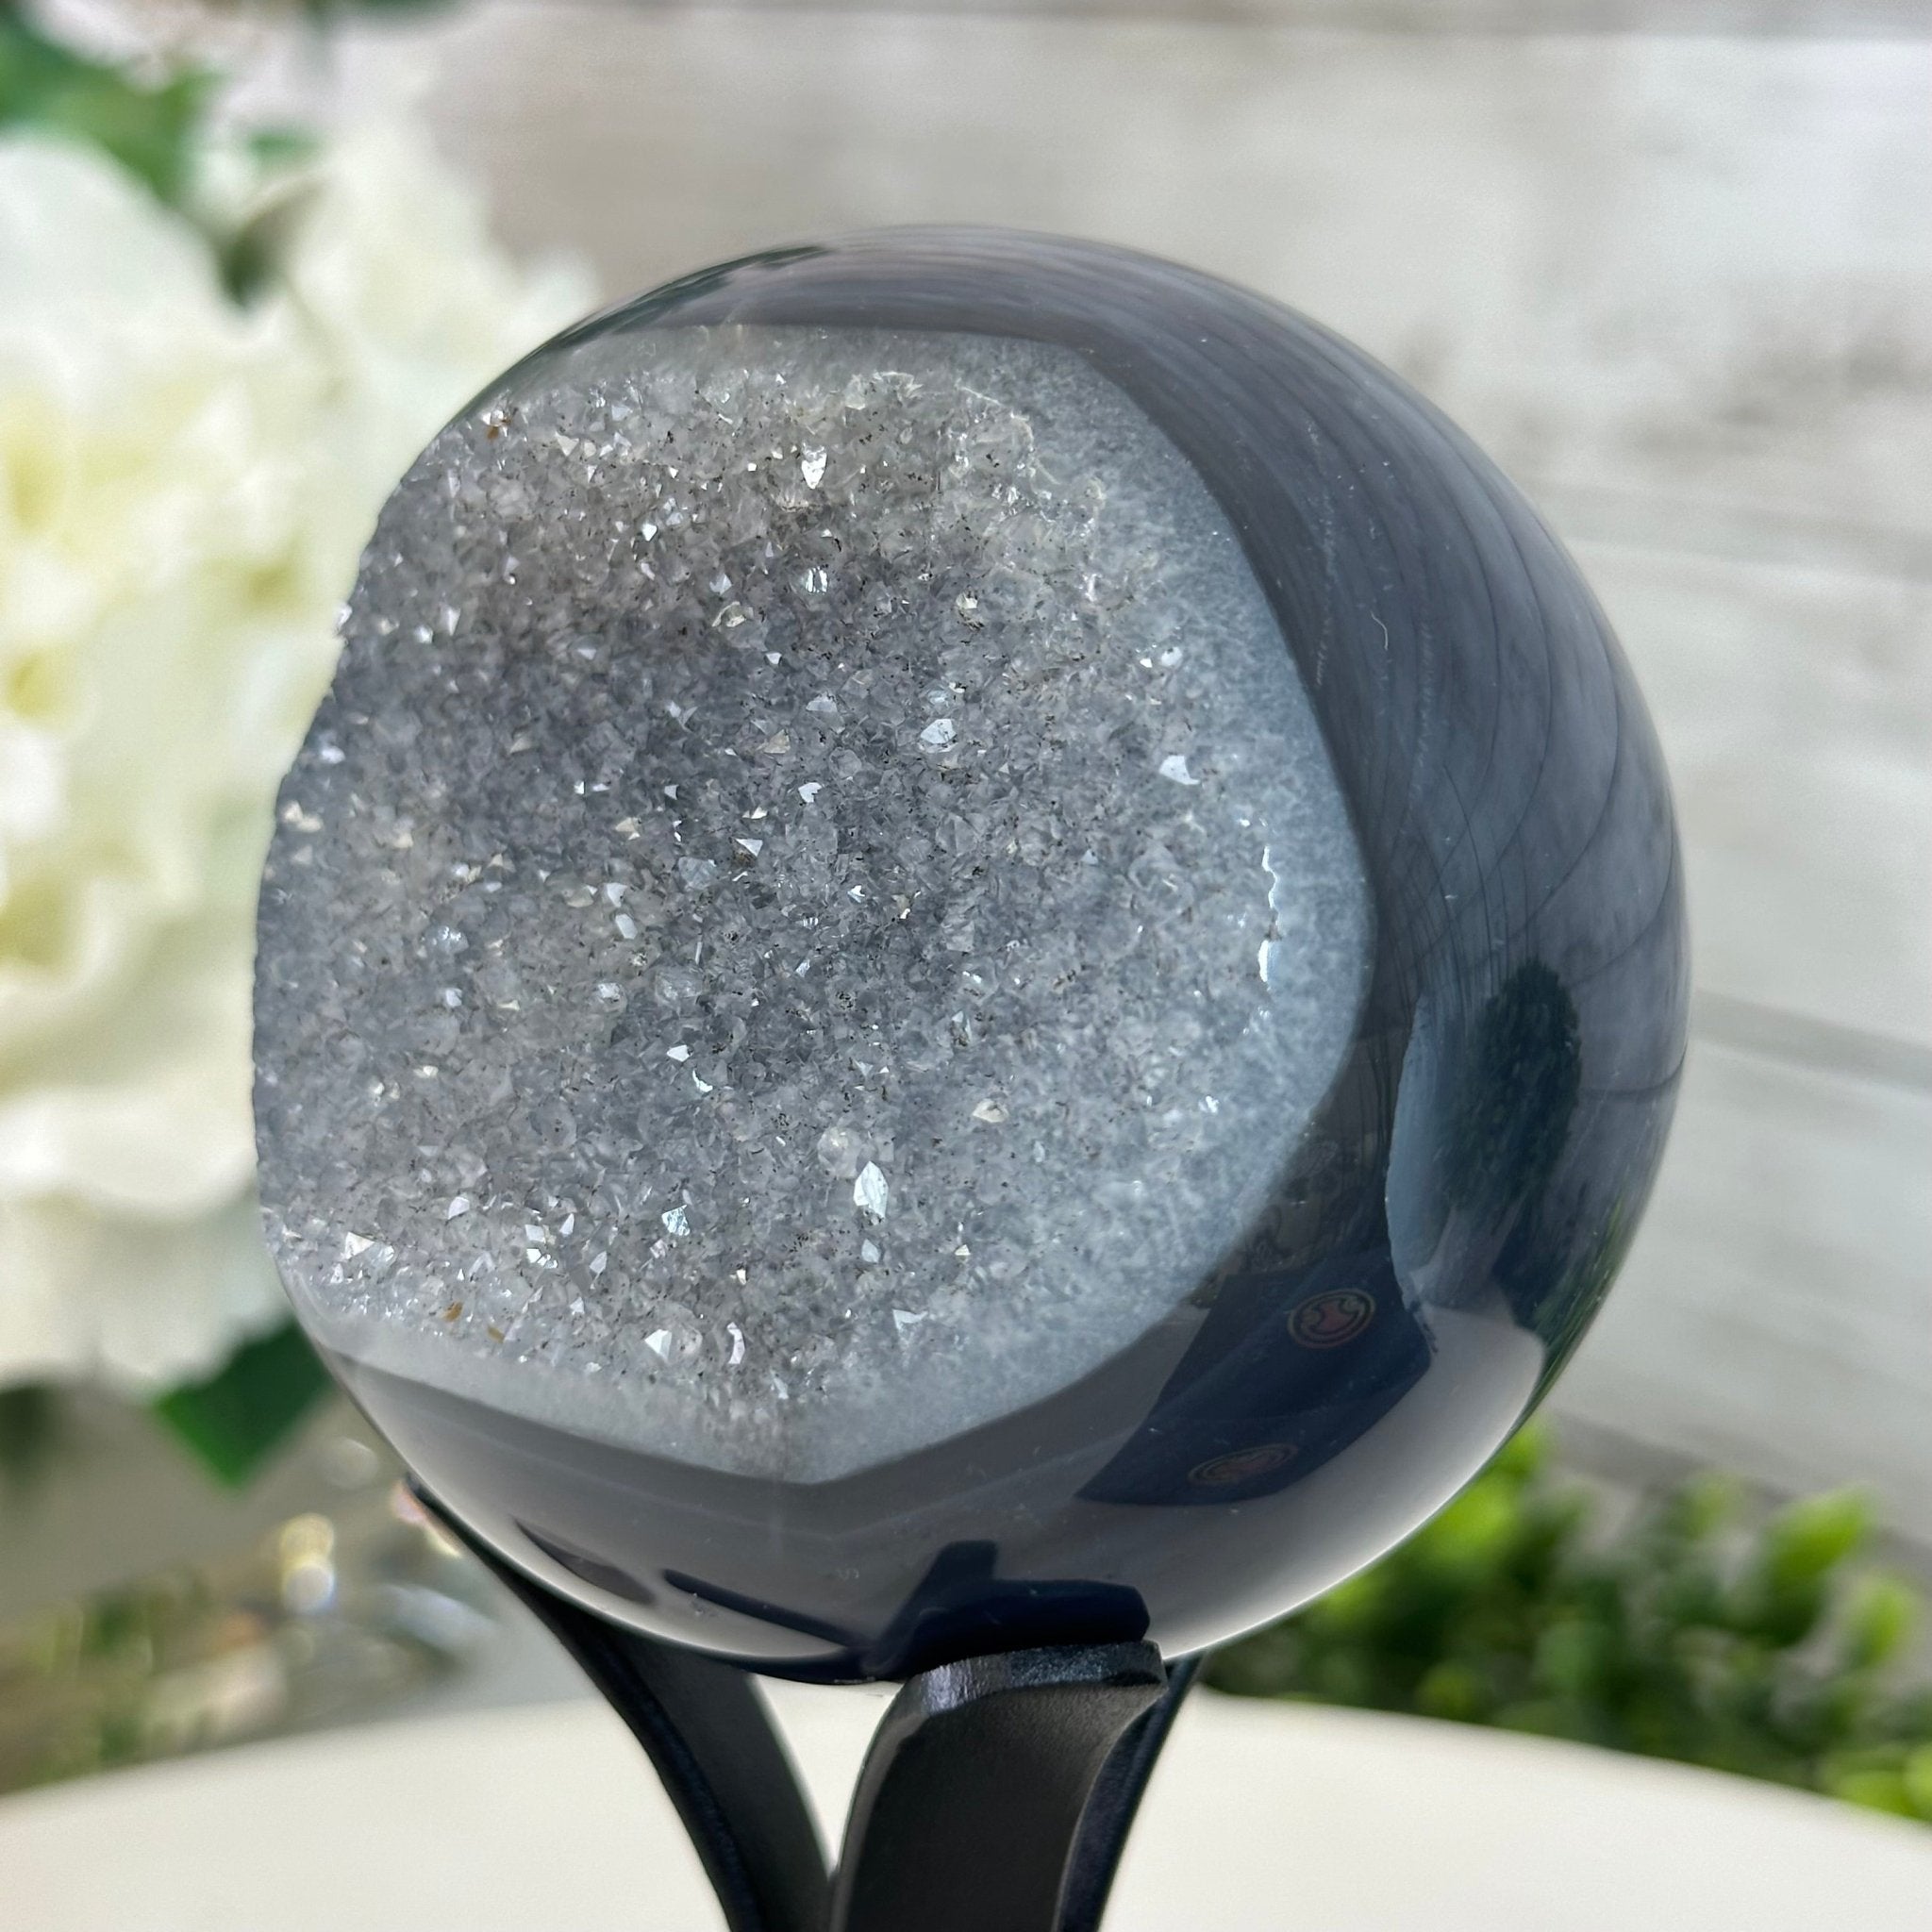 Druzy Agate Sphere on a Metal Stand, 1.3 lbs & 6.8" Tall #5634-0006 - Brazil GemsBrazil GemsDruzy Agate Sphere on a Metal Stand, 1.3 lbs & 6.8" Tall #5634-0006Spheres5634-0006